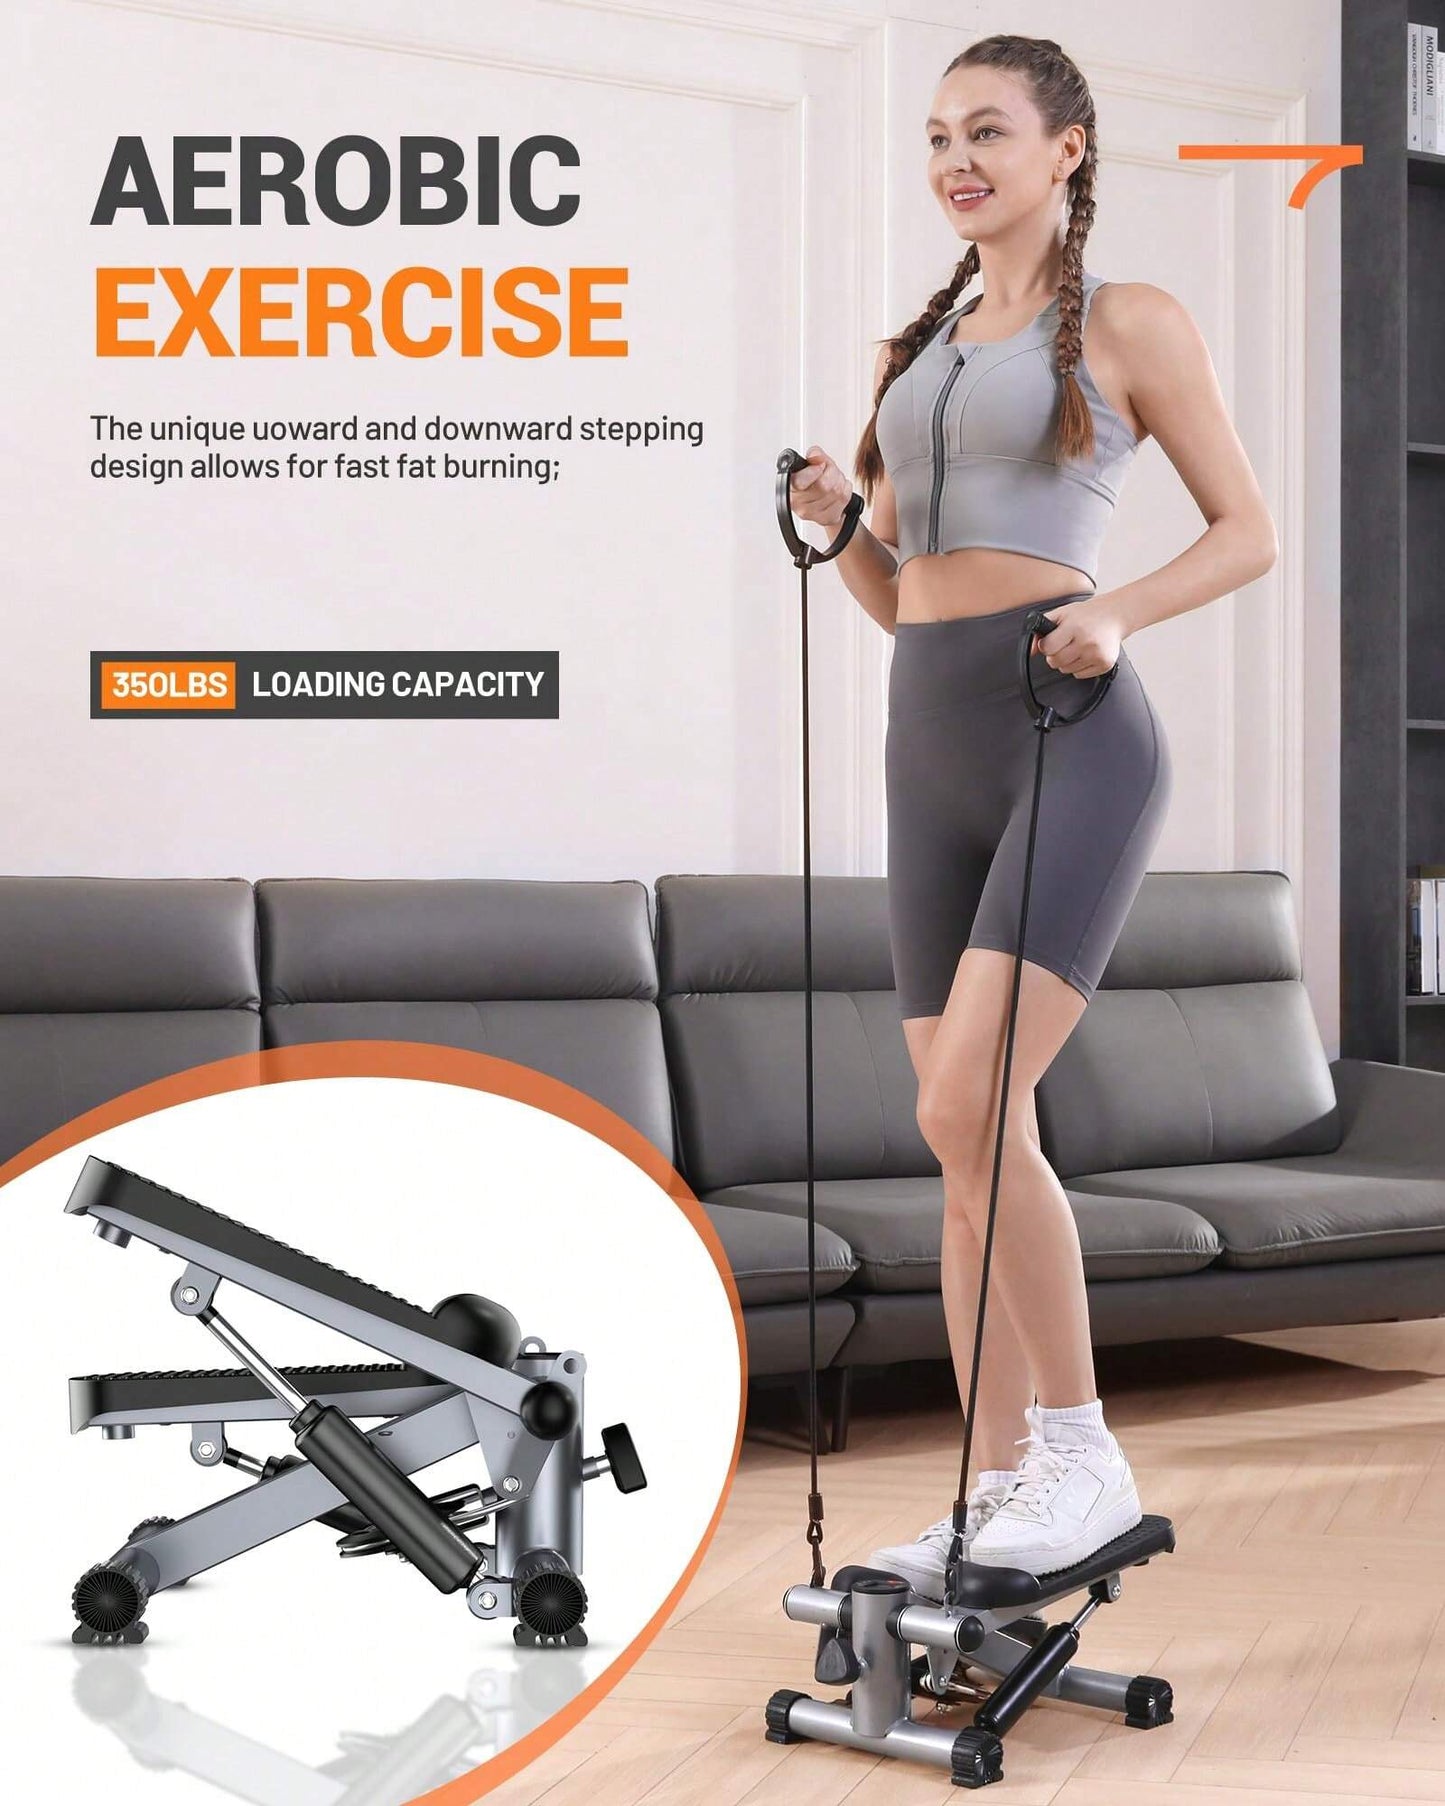 Compact Exercise Stepper with Resistance Band for Home Workouts. Supports up to 350lbs, Counts Calories, and Promotes Efficient Fat Burning. Ideal for Indoor Fitness Anytime, Anywhere.